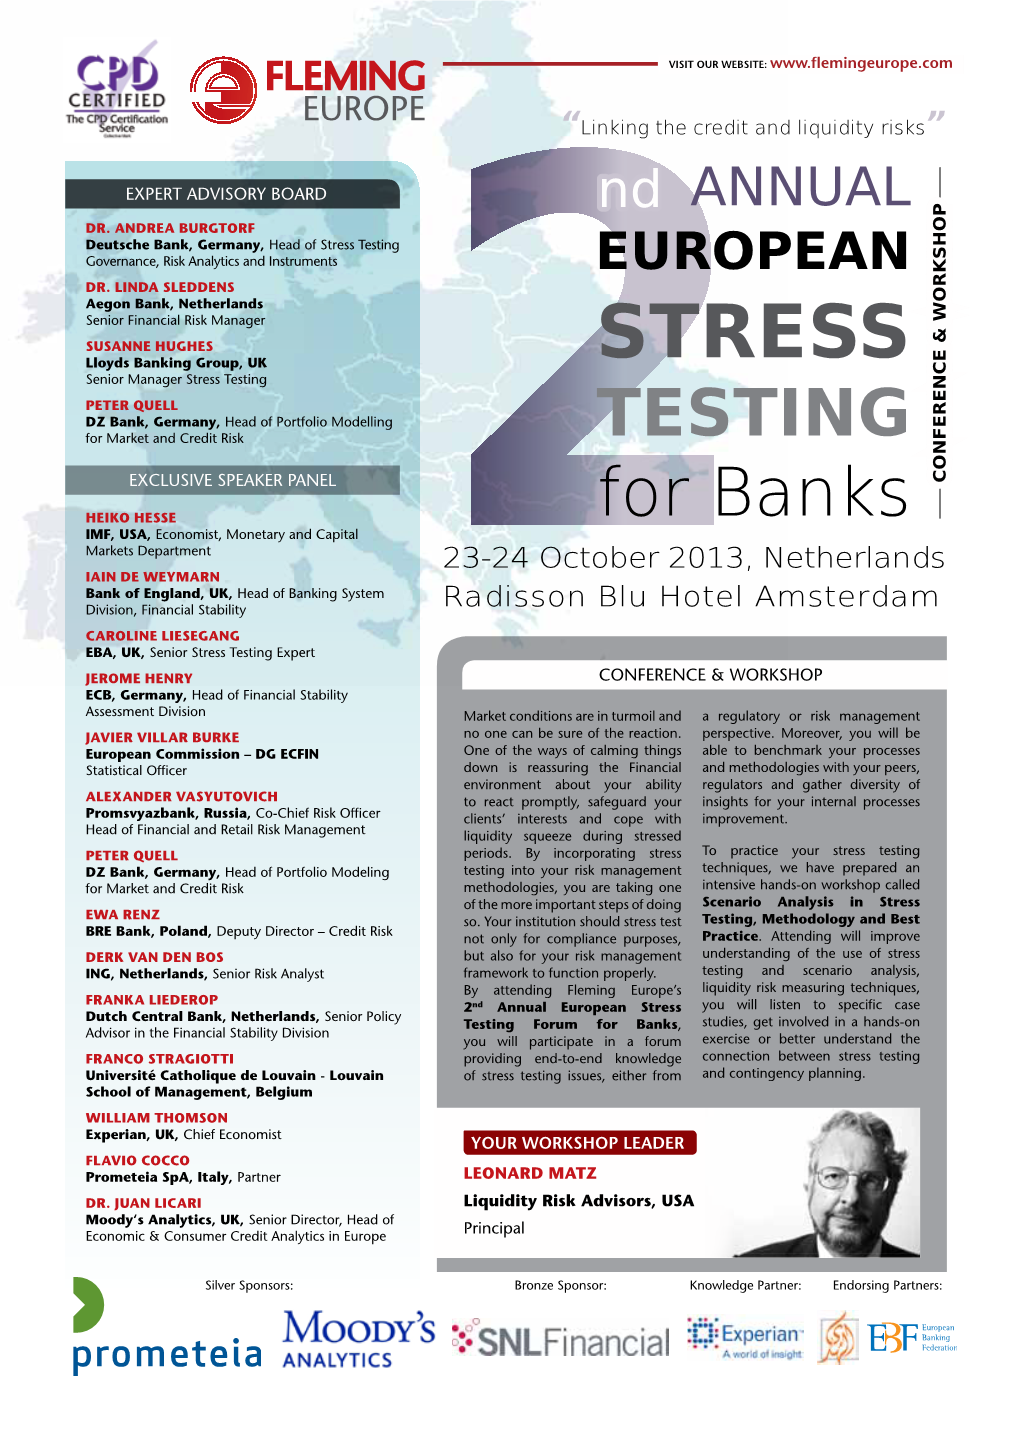 Stress Testing Governance, Risk Analytics and Instruments European Dr